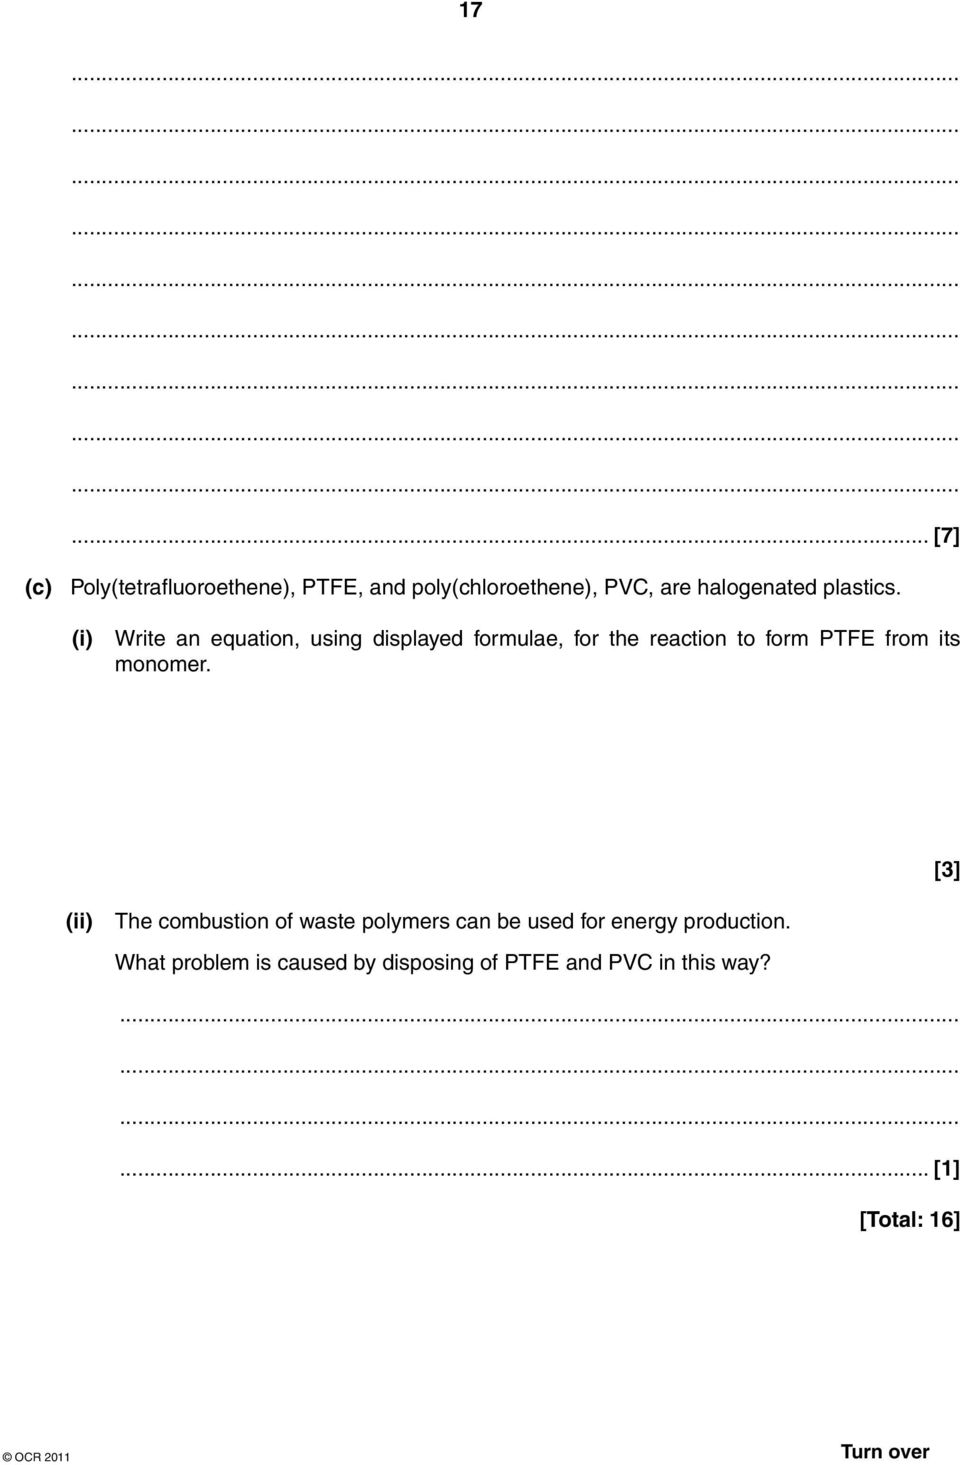 (i) Write an equation, using displayed formulae, for the reaction to form PTFE from its